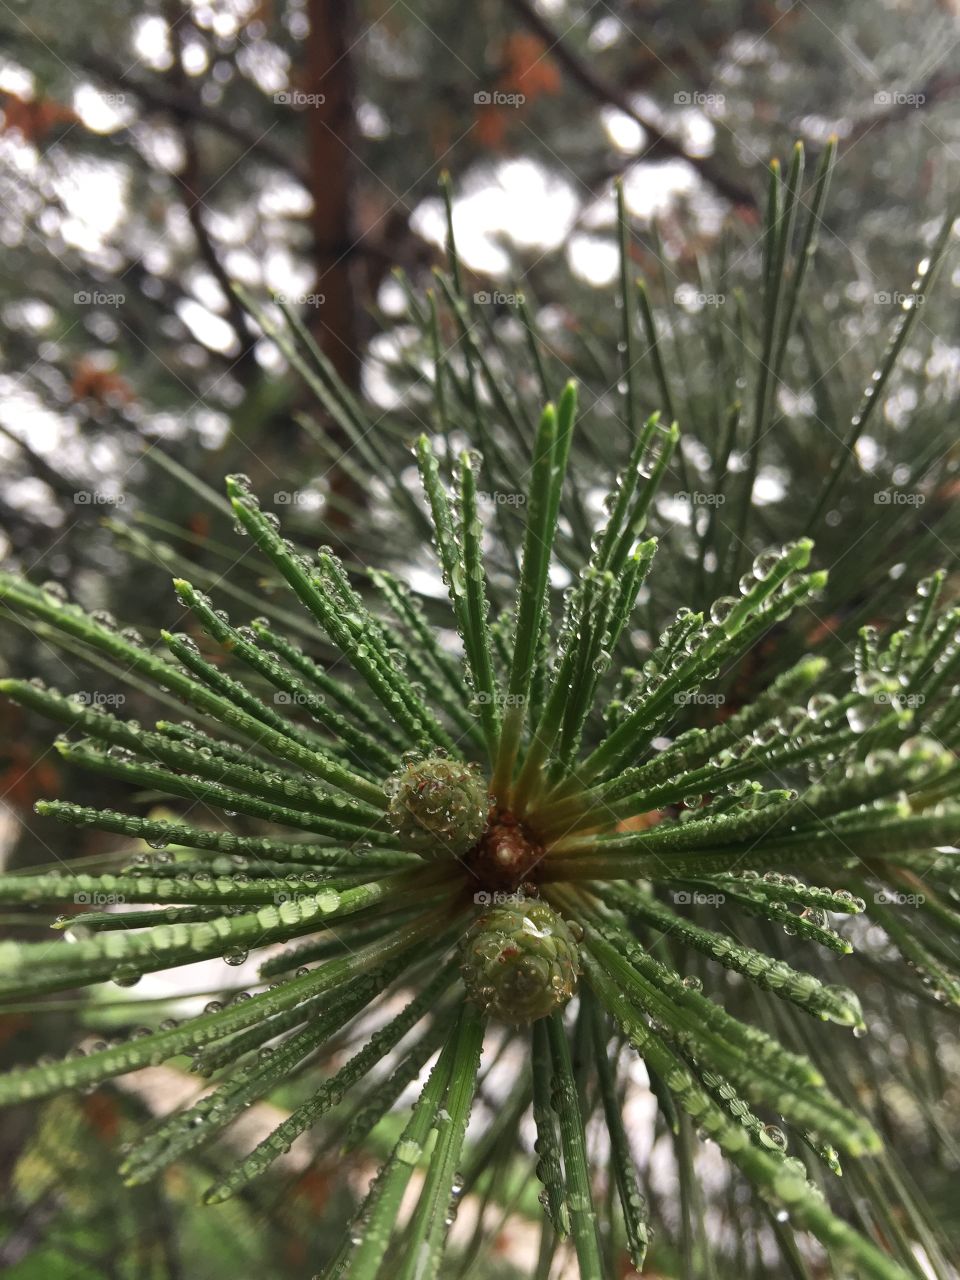 Two newly formed pine cones surrounded by water droplet-adorned pine needles. 